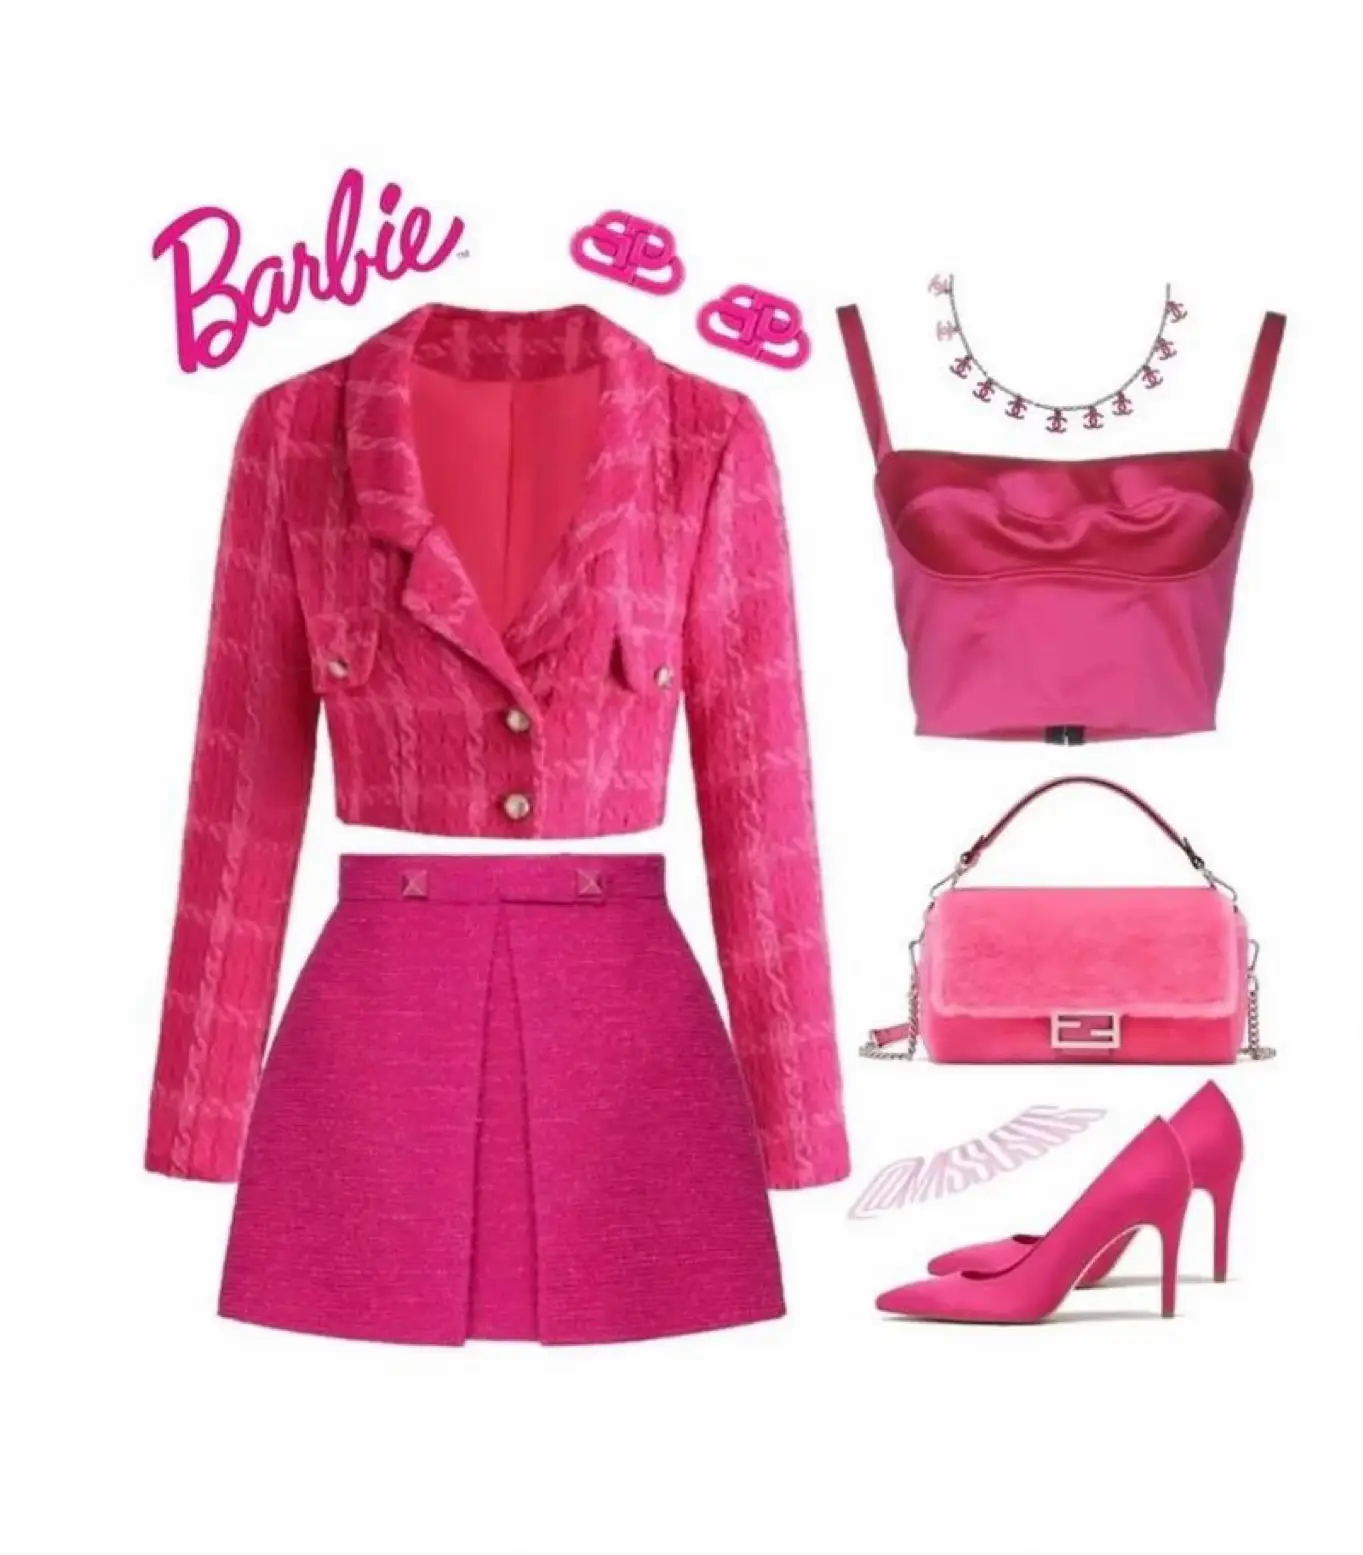 BARBIECORE outfit inspo 💗, Gallery posted by Amanda Dawson